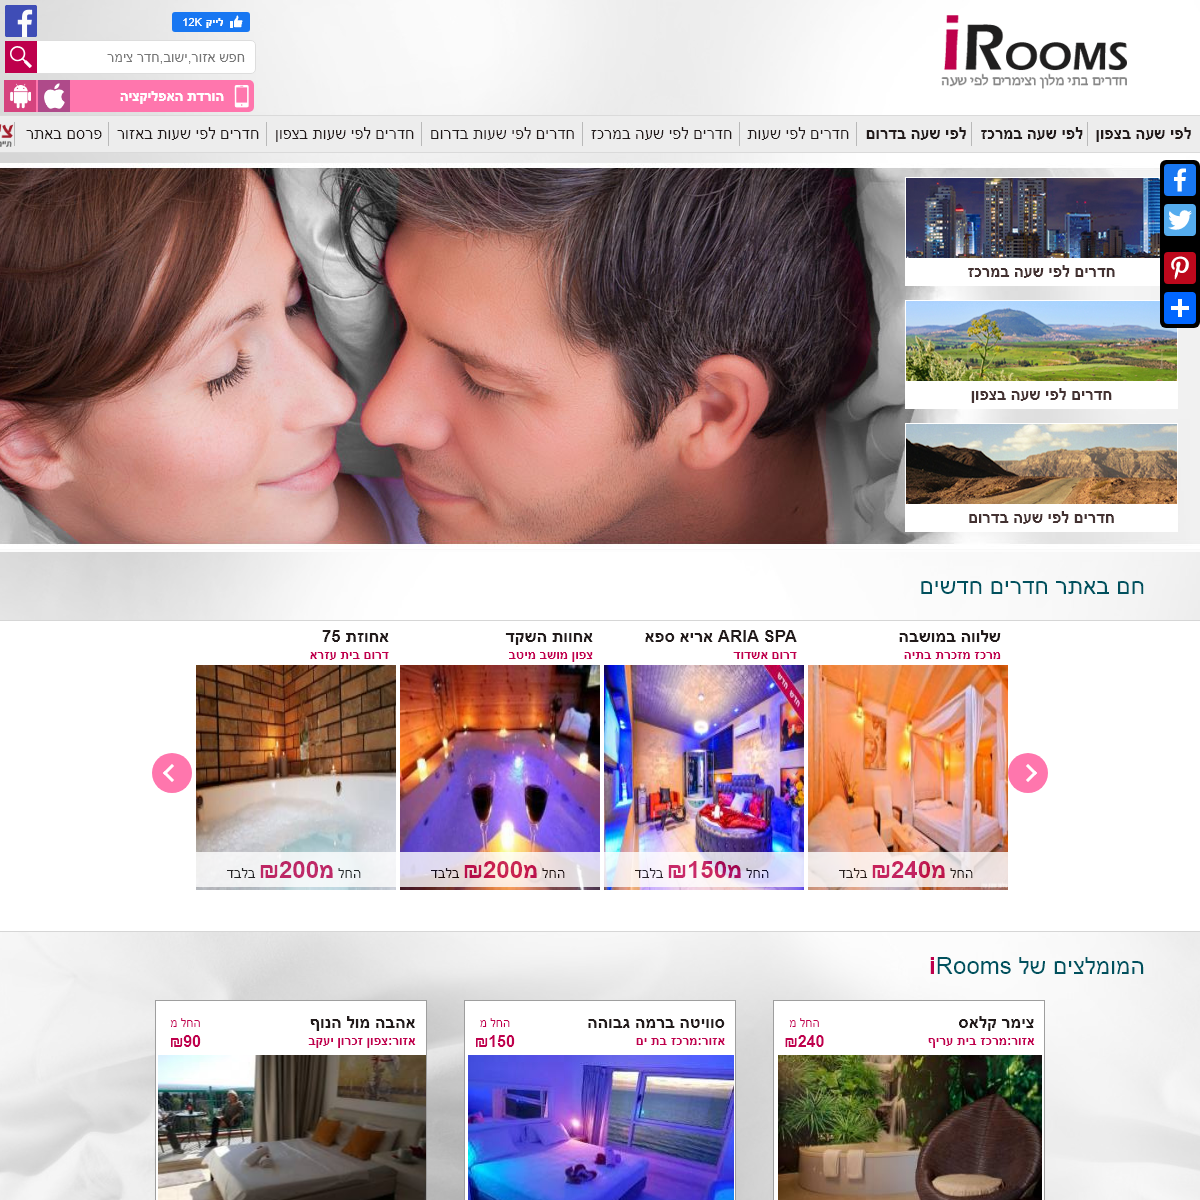 A complete backup of irooms.co.il